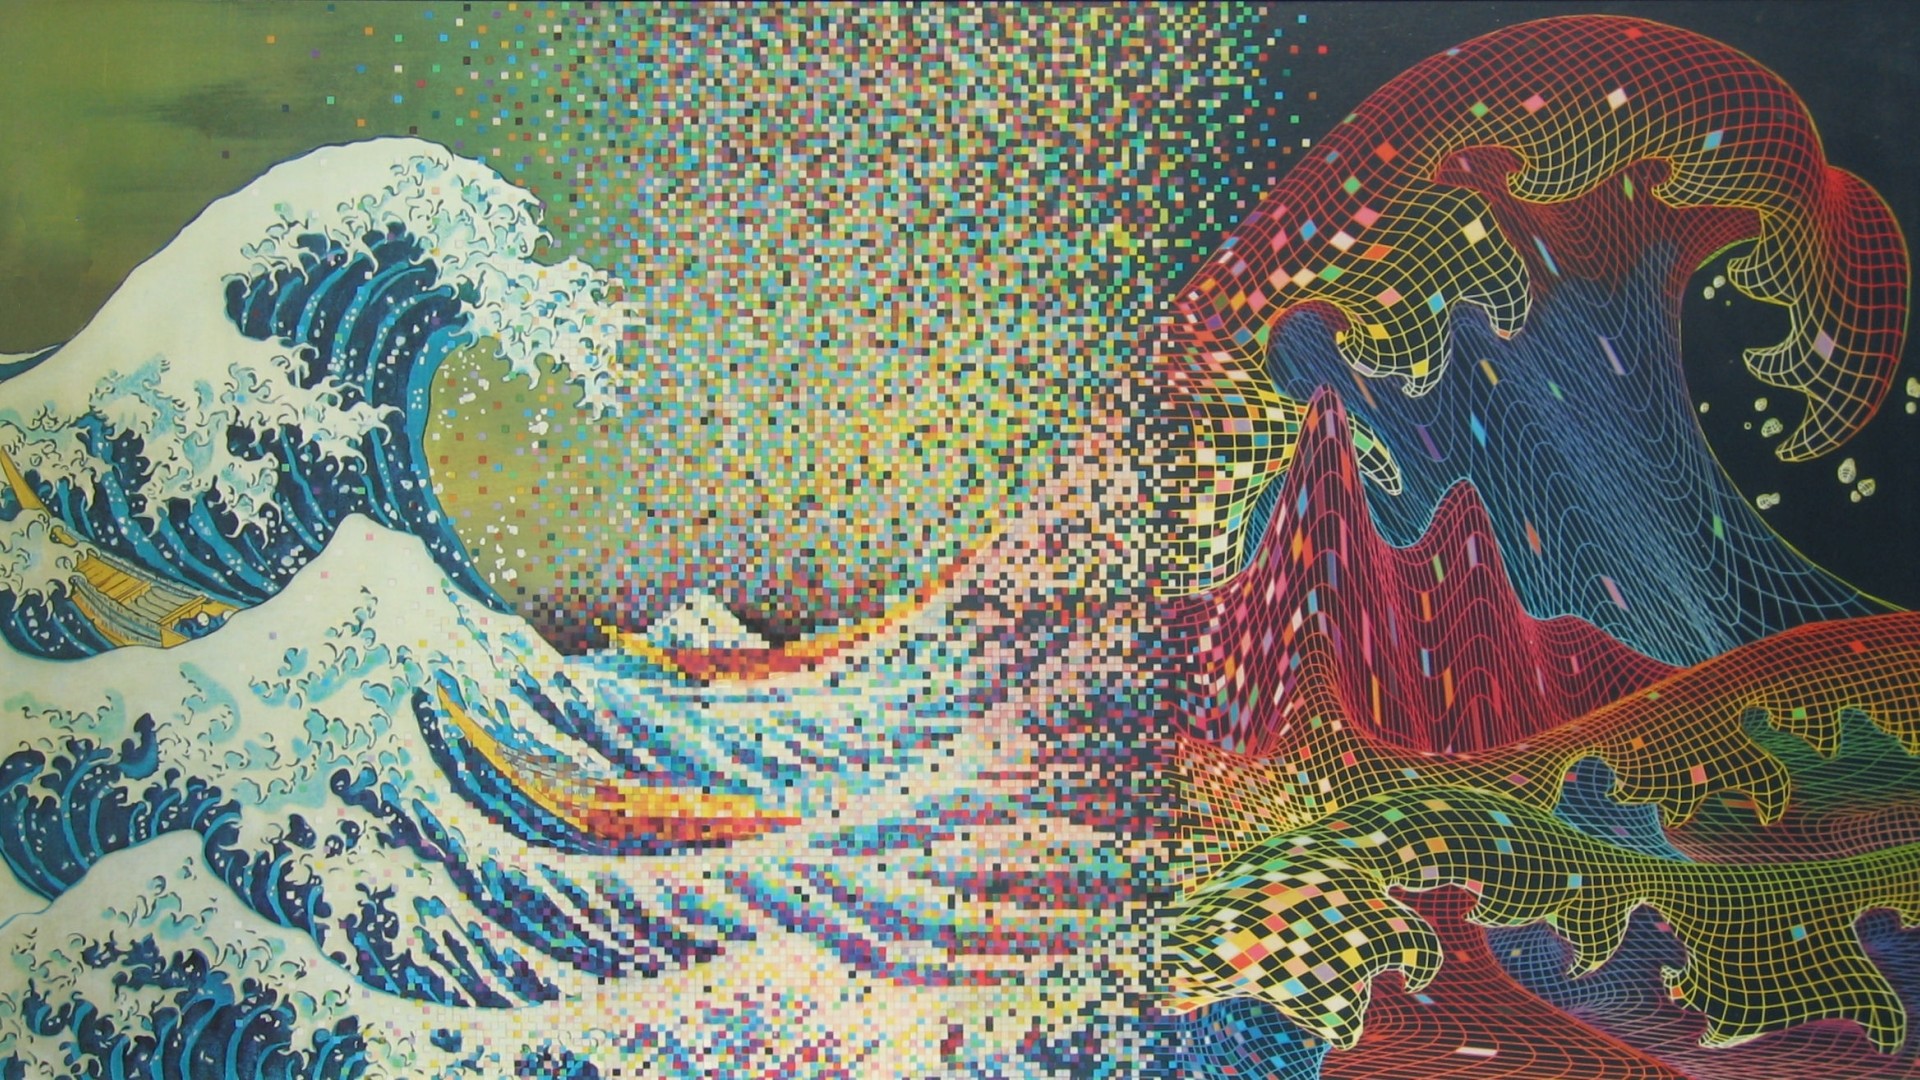 1920x1080 "The Wave of the Future" poster made for an IBM users group, a portrayal of  "Great Wave off of Kanagawa" by Japanese artist Katsushika Hokusai